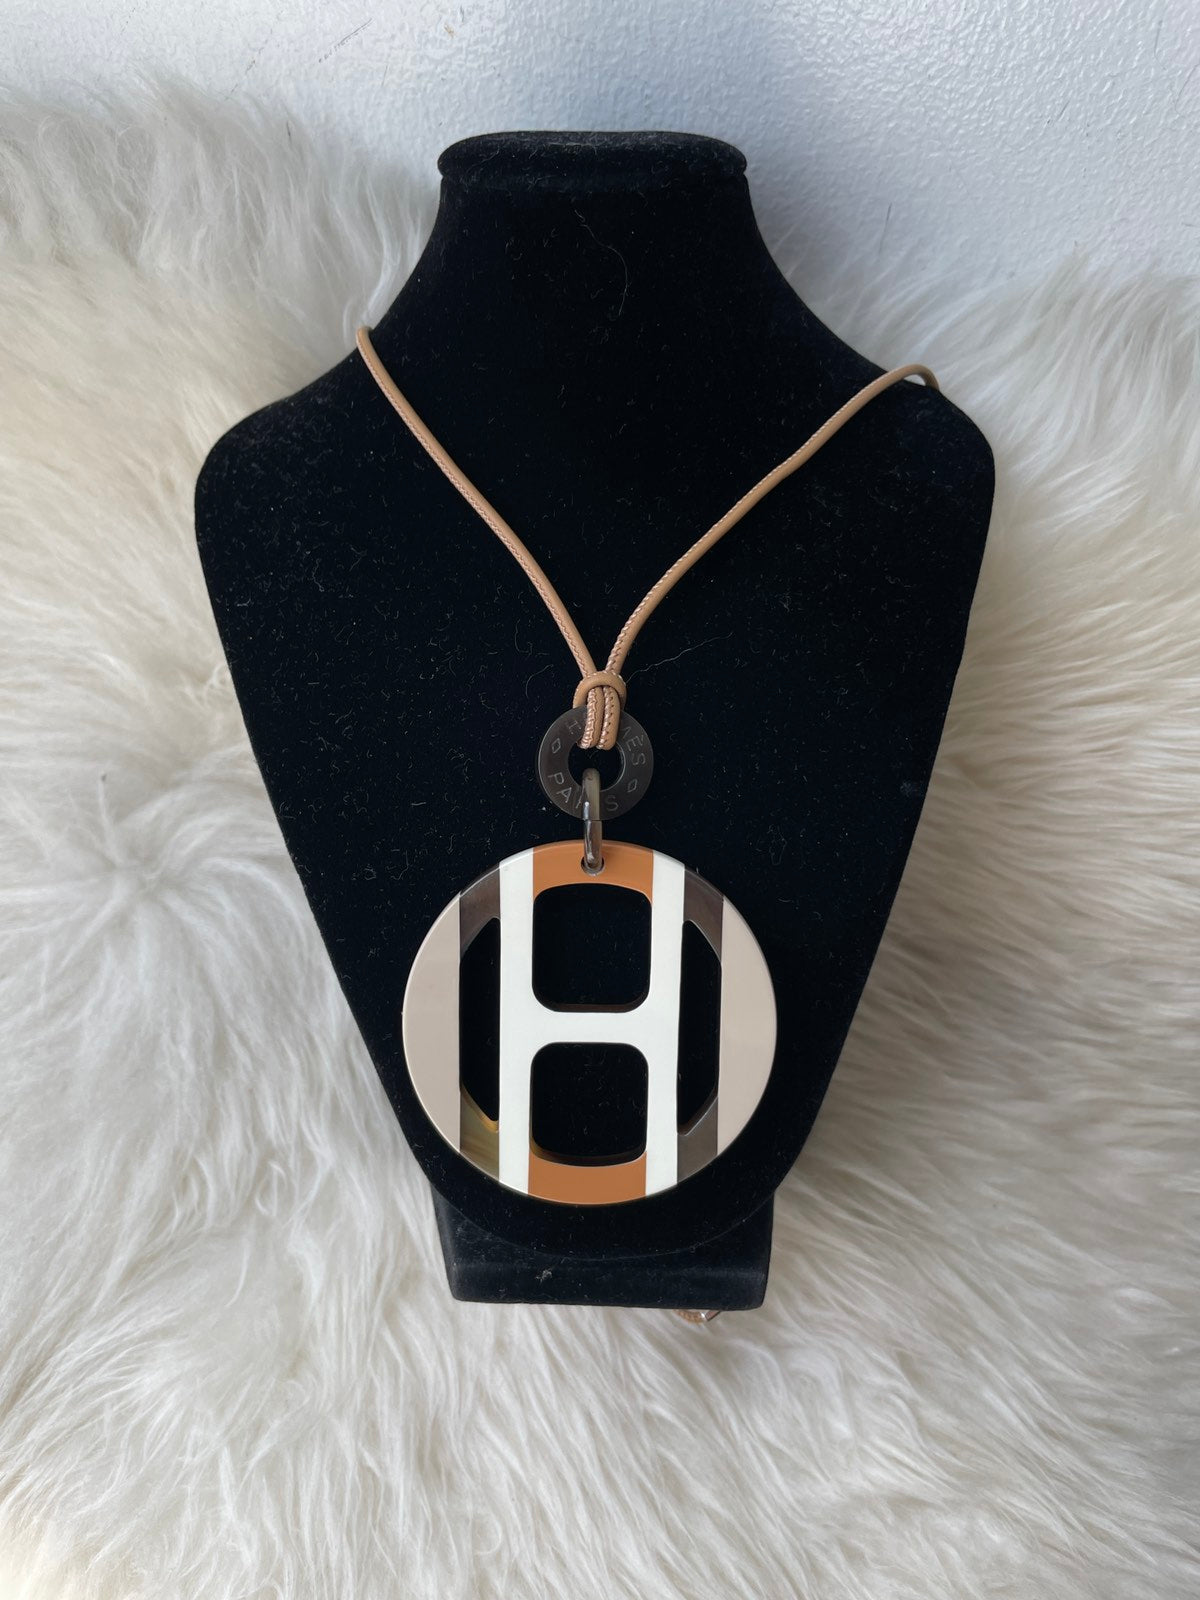 Hermes Buffalo Horn Necklace Pendant Gold Brown | Chairish